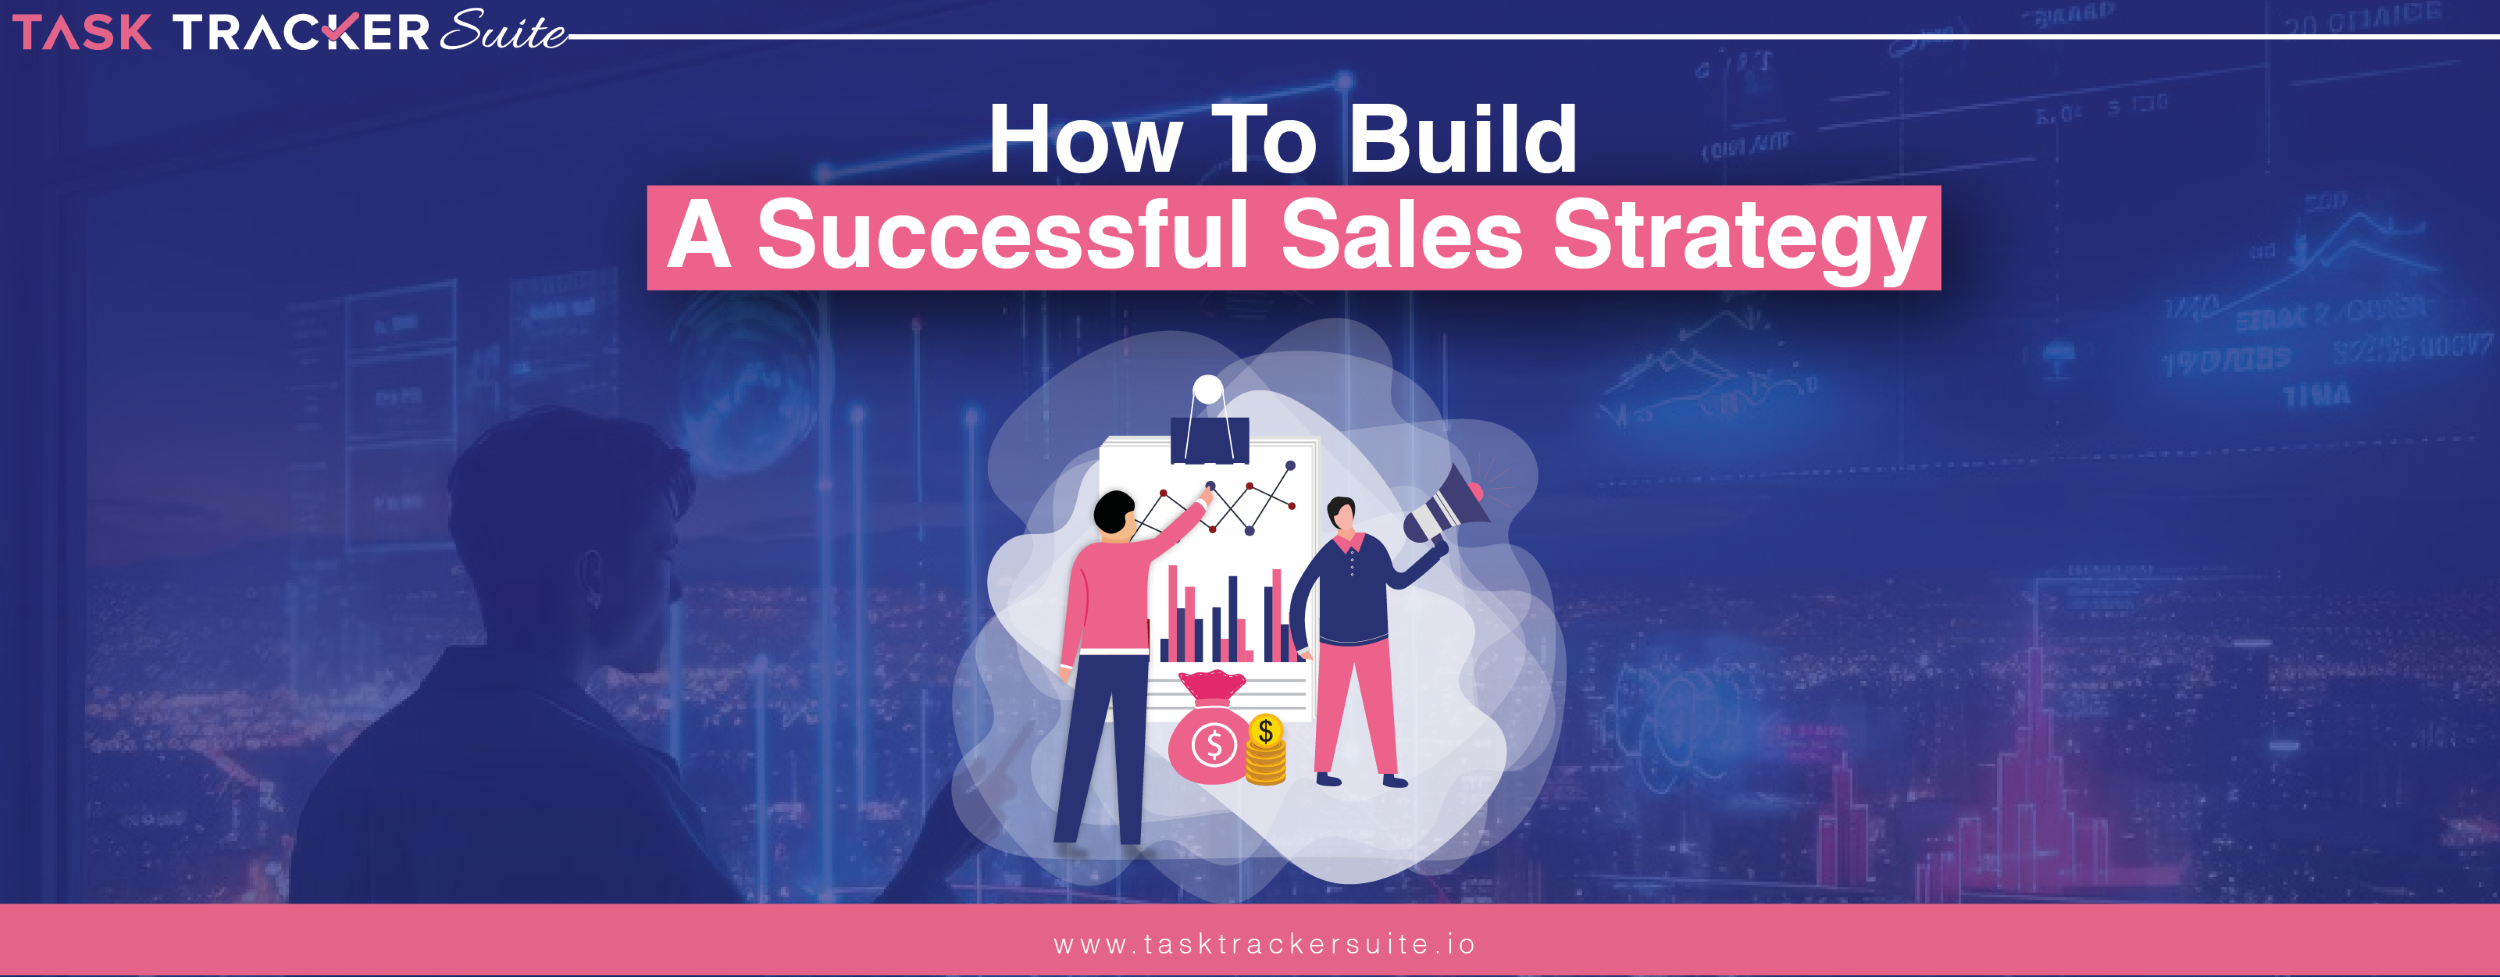 How To Build A Successful Sales Strategy